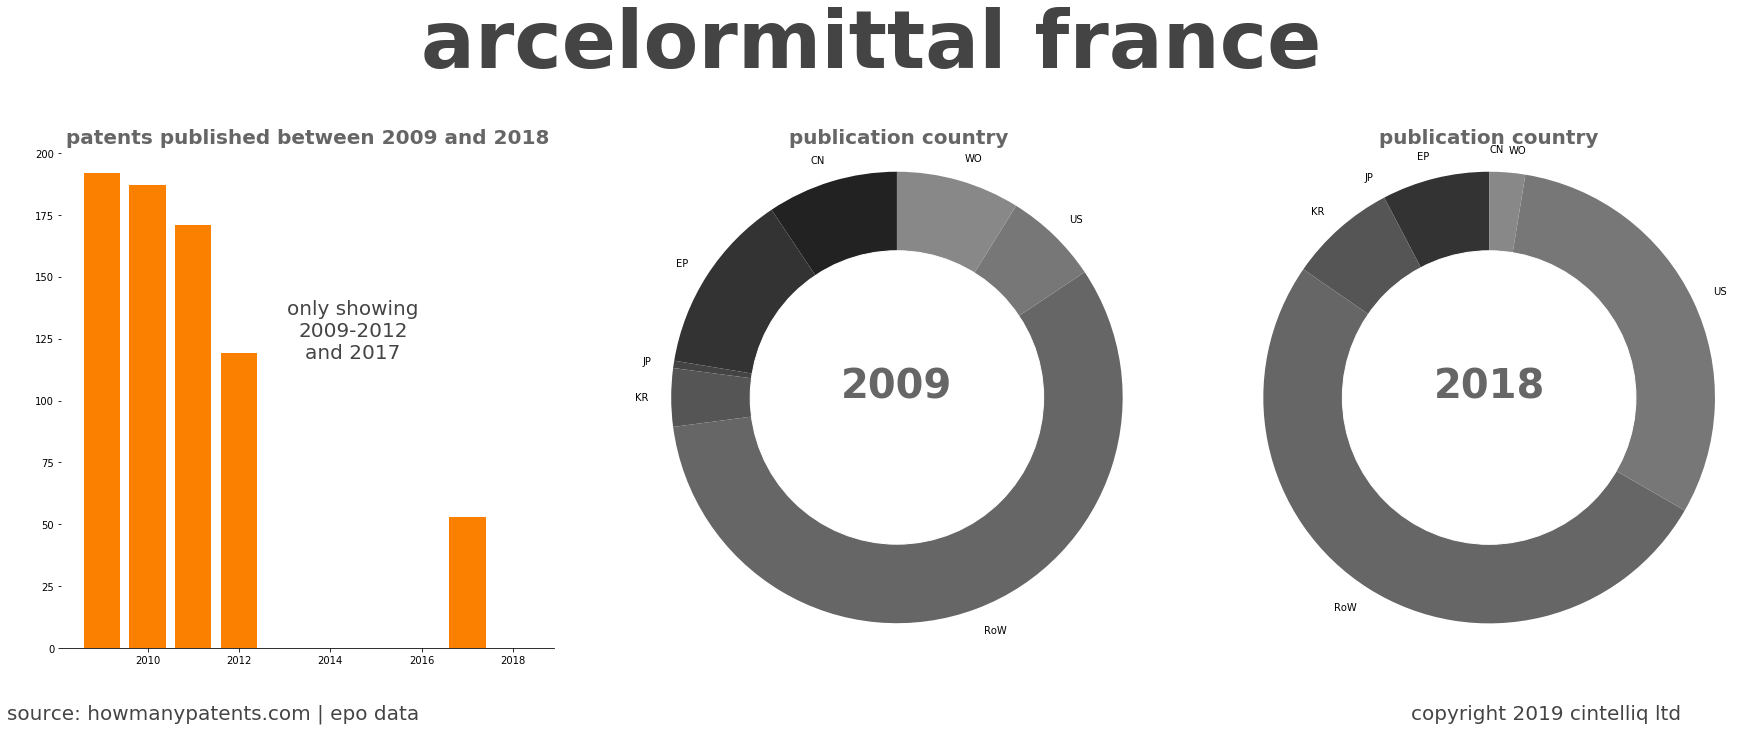 summary of patents for Arcelormittal France